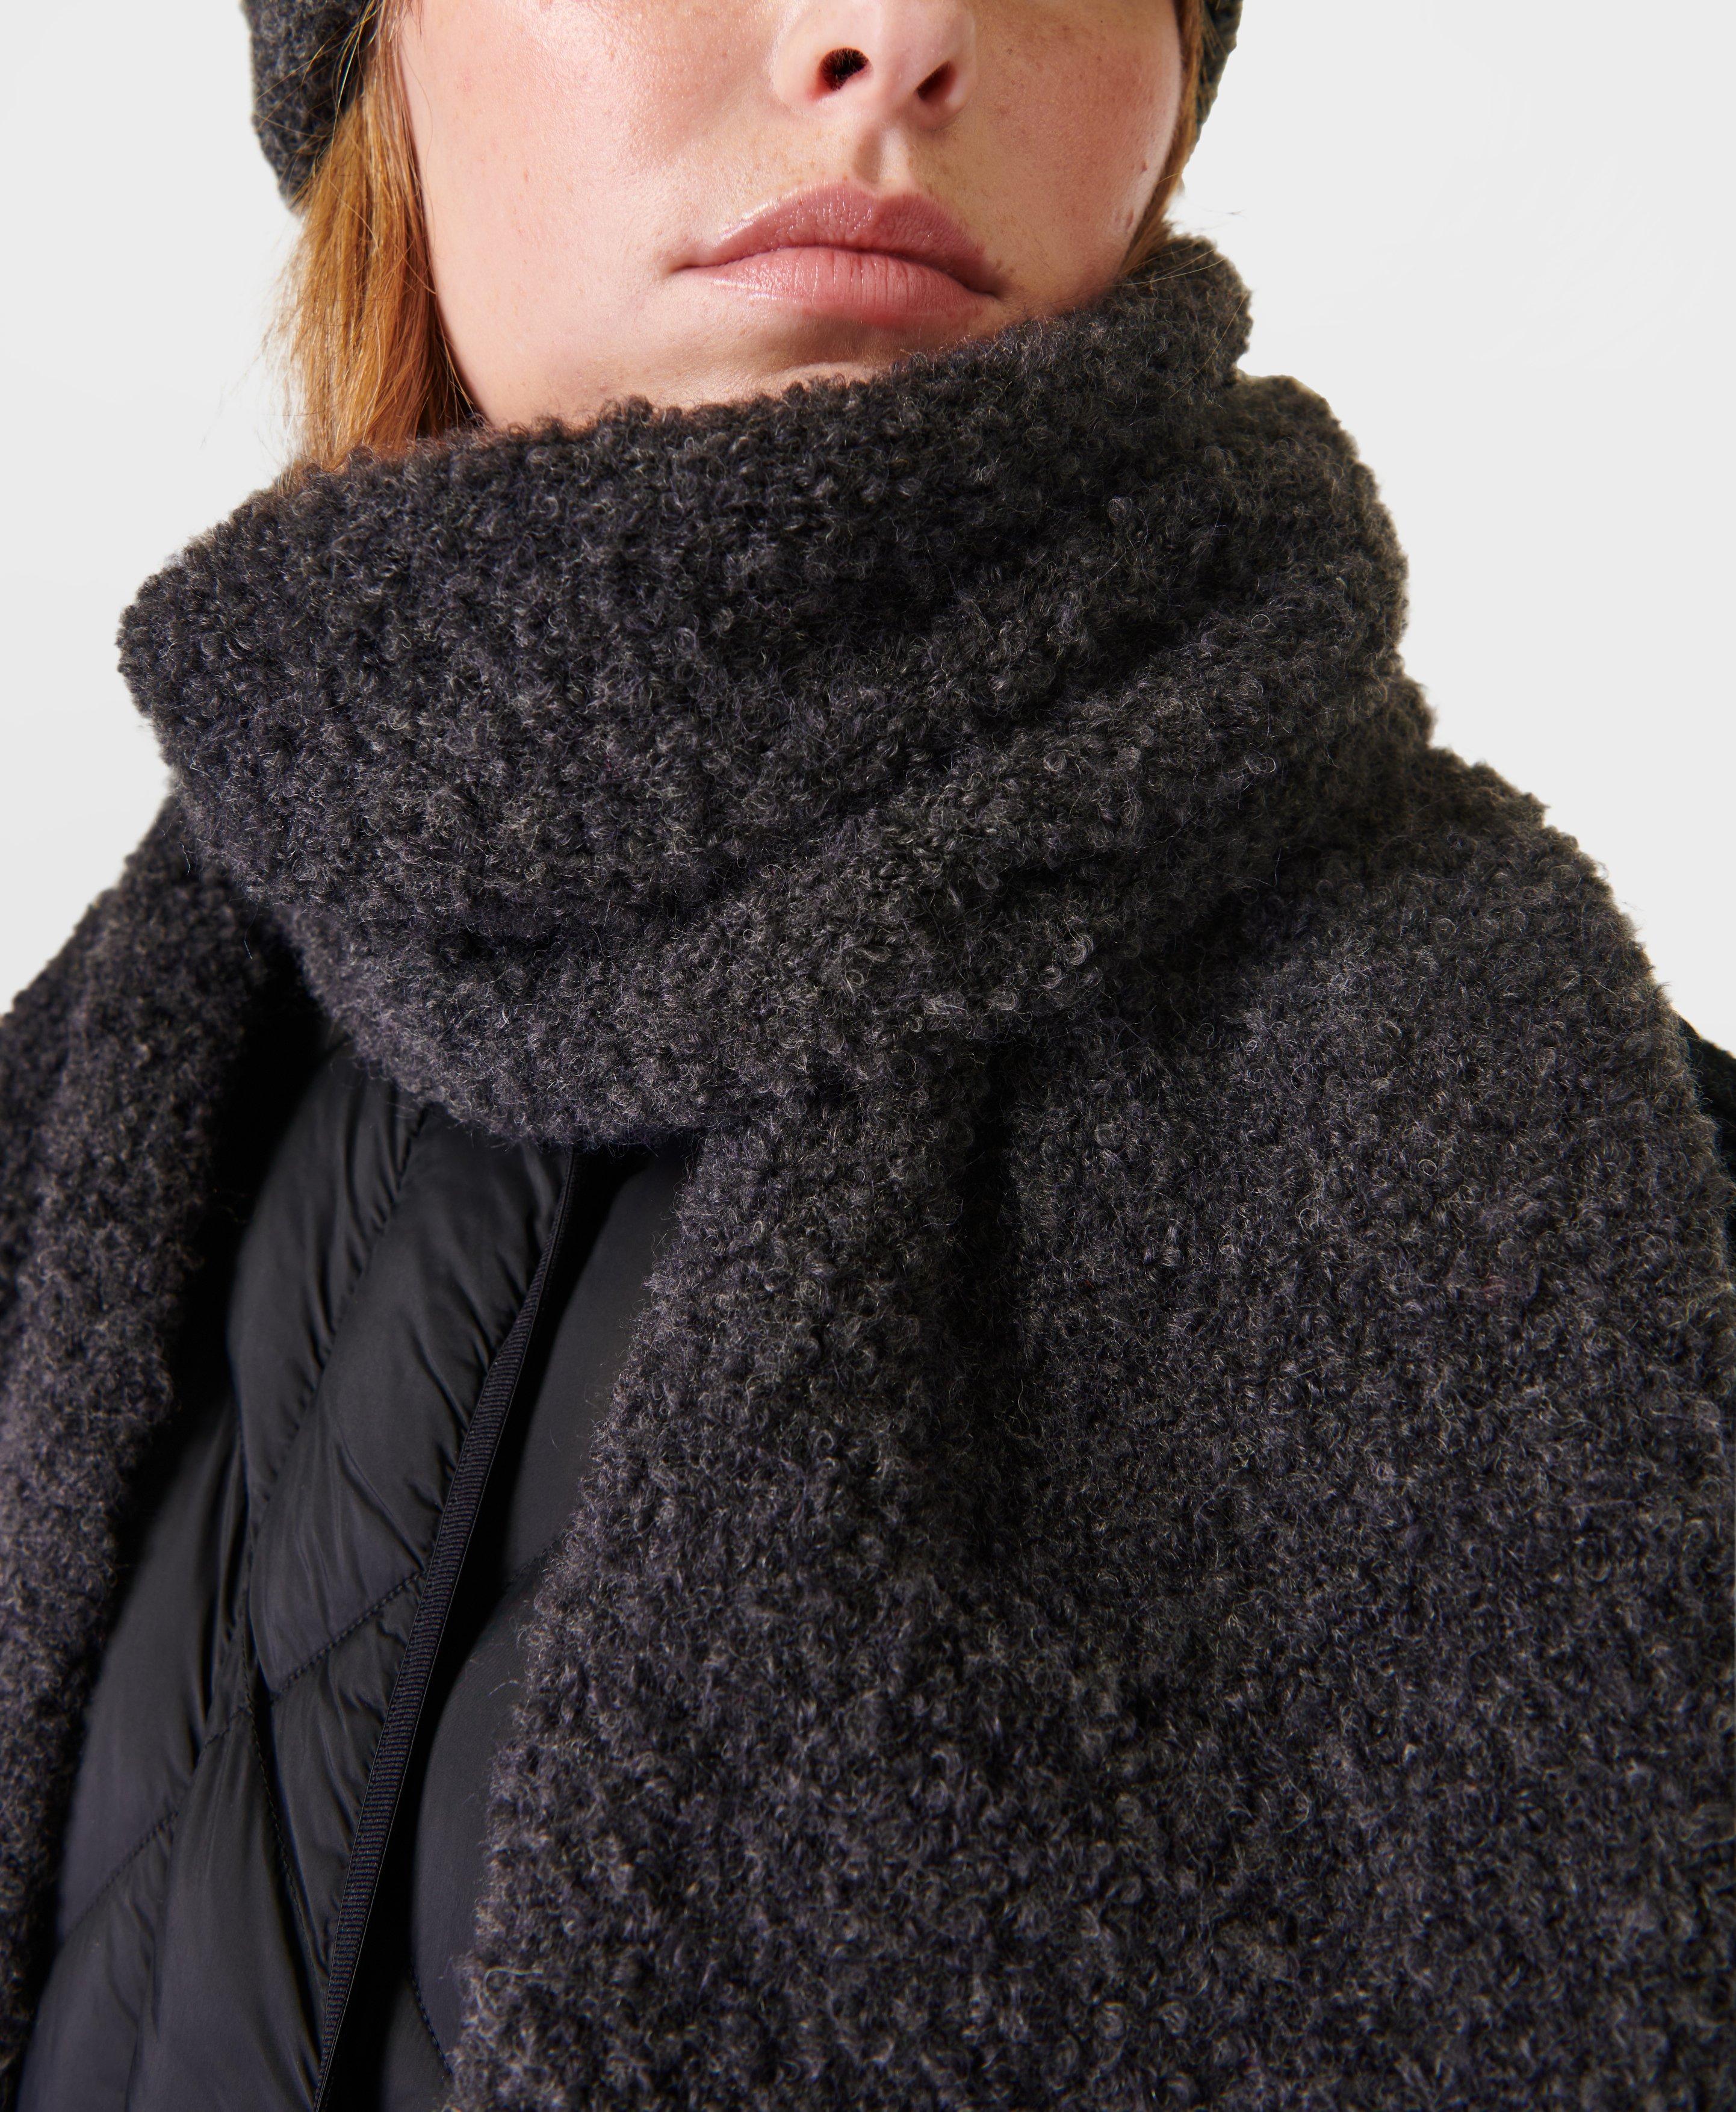 Boucle Knit Scarf - Urban Grey, Women's Accessories